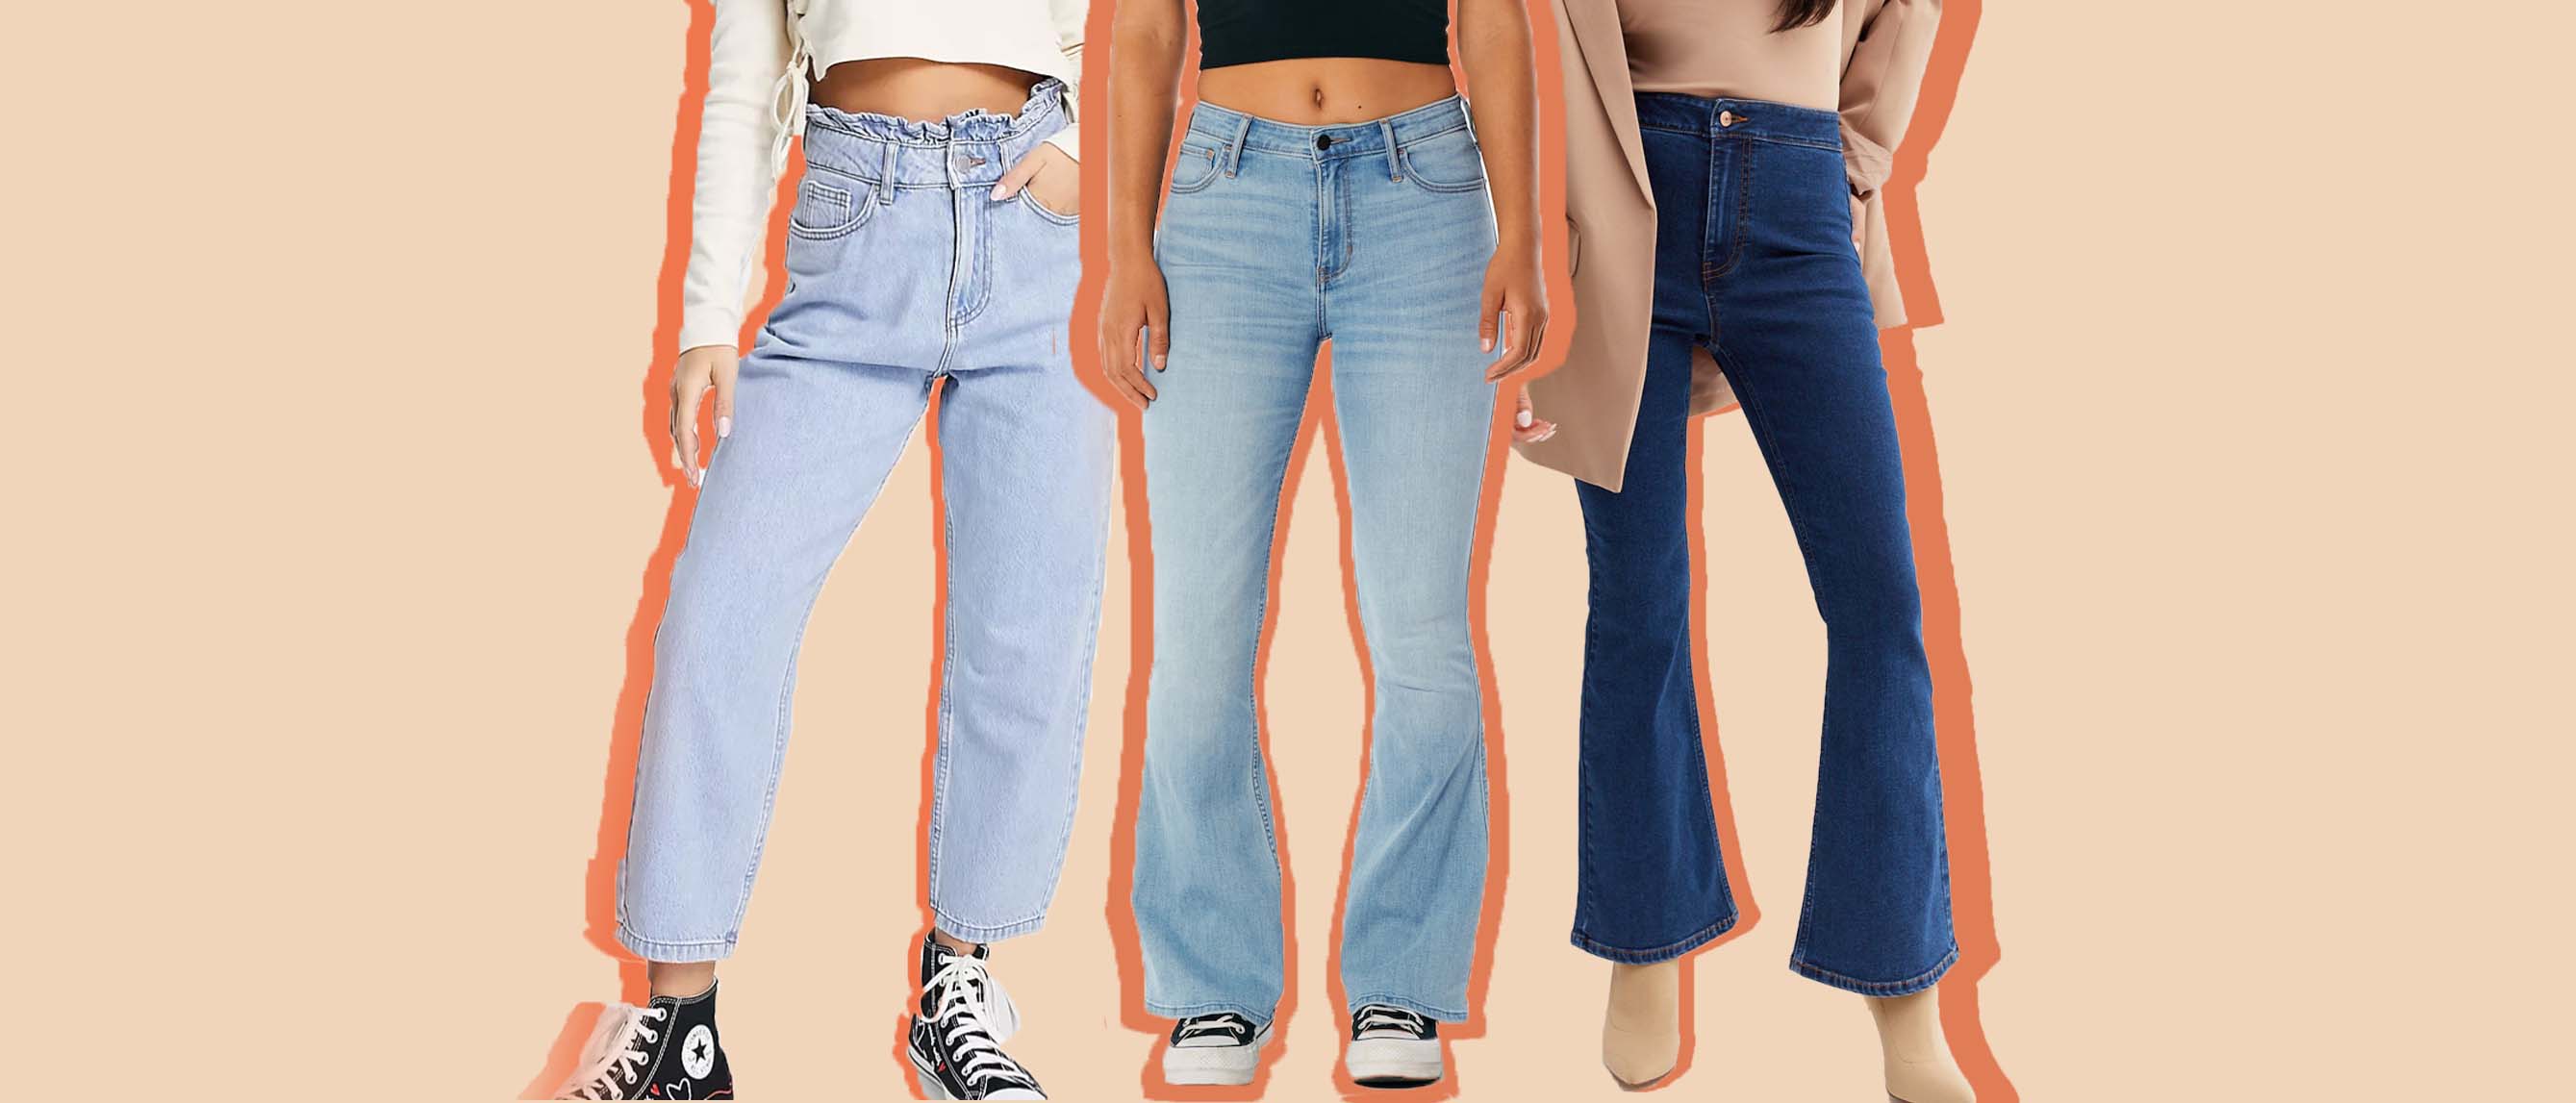 High Rise Petite Jeans for Women